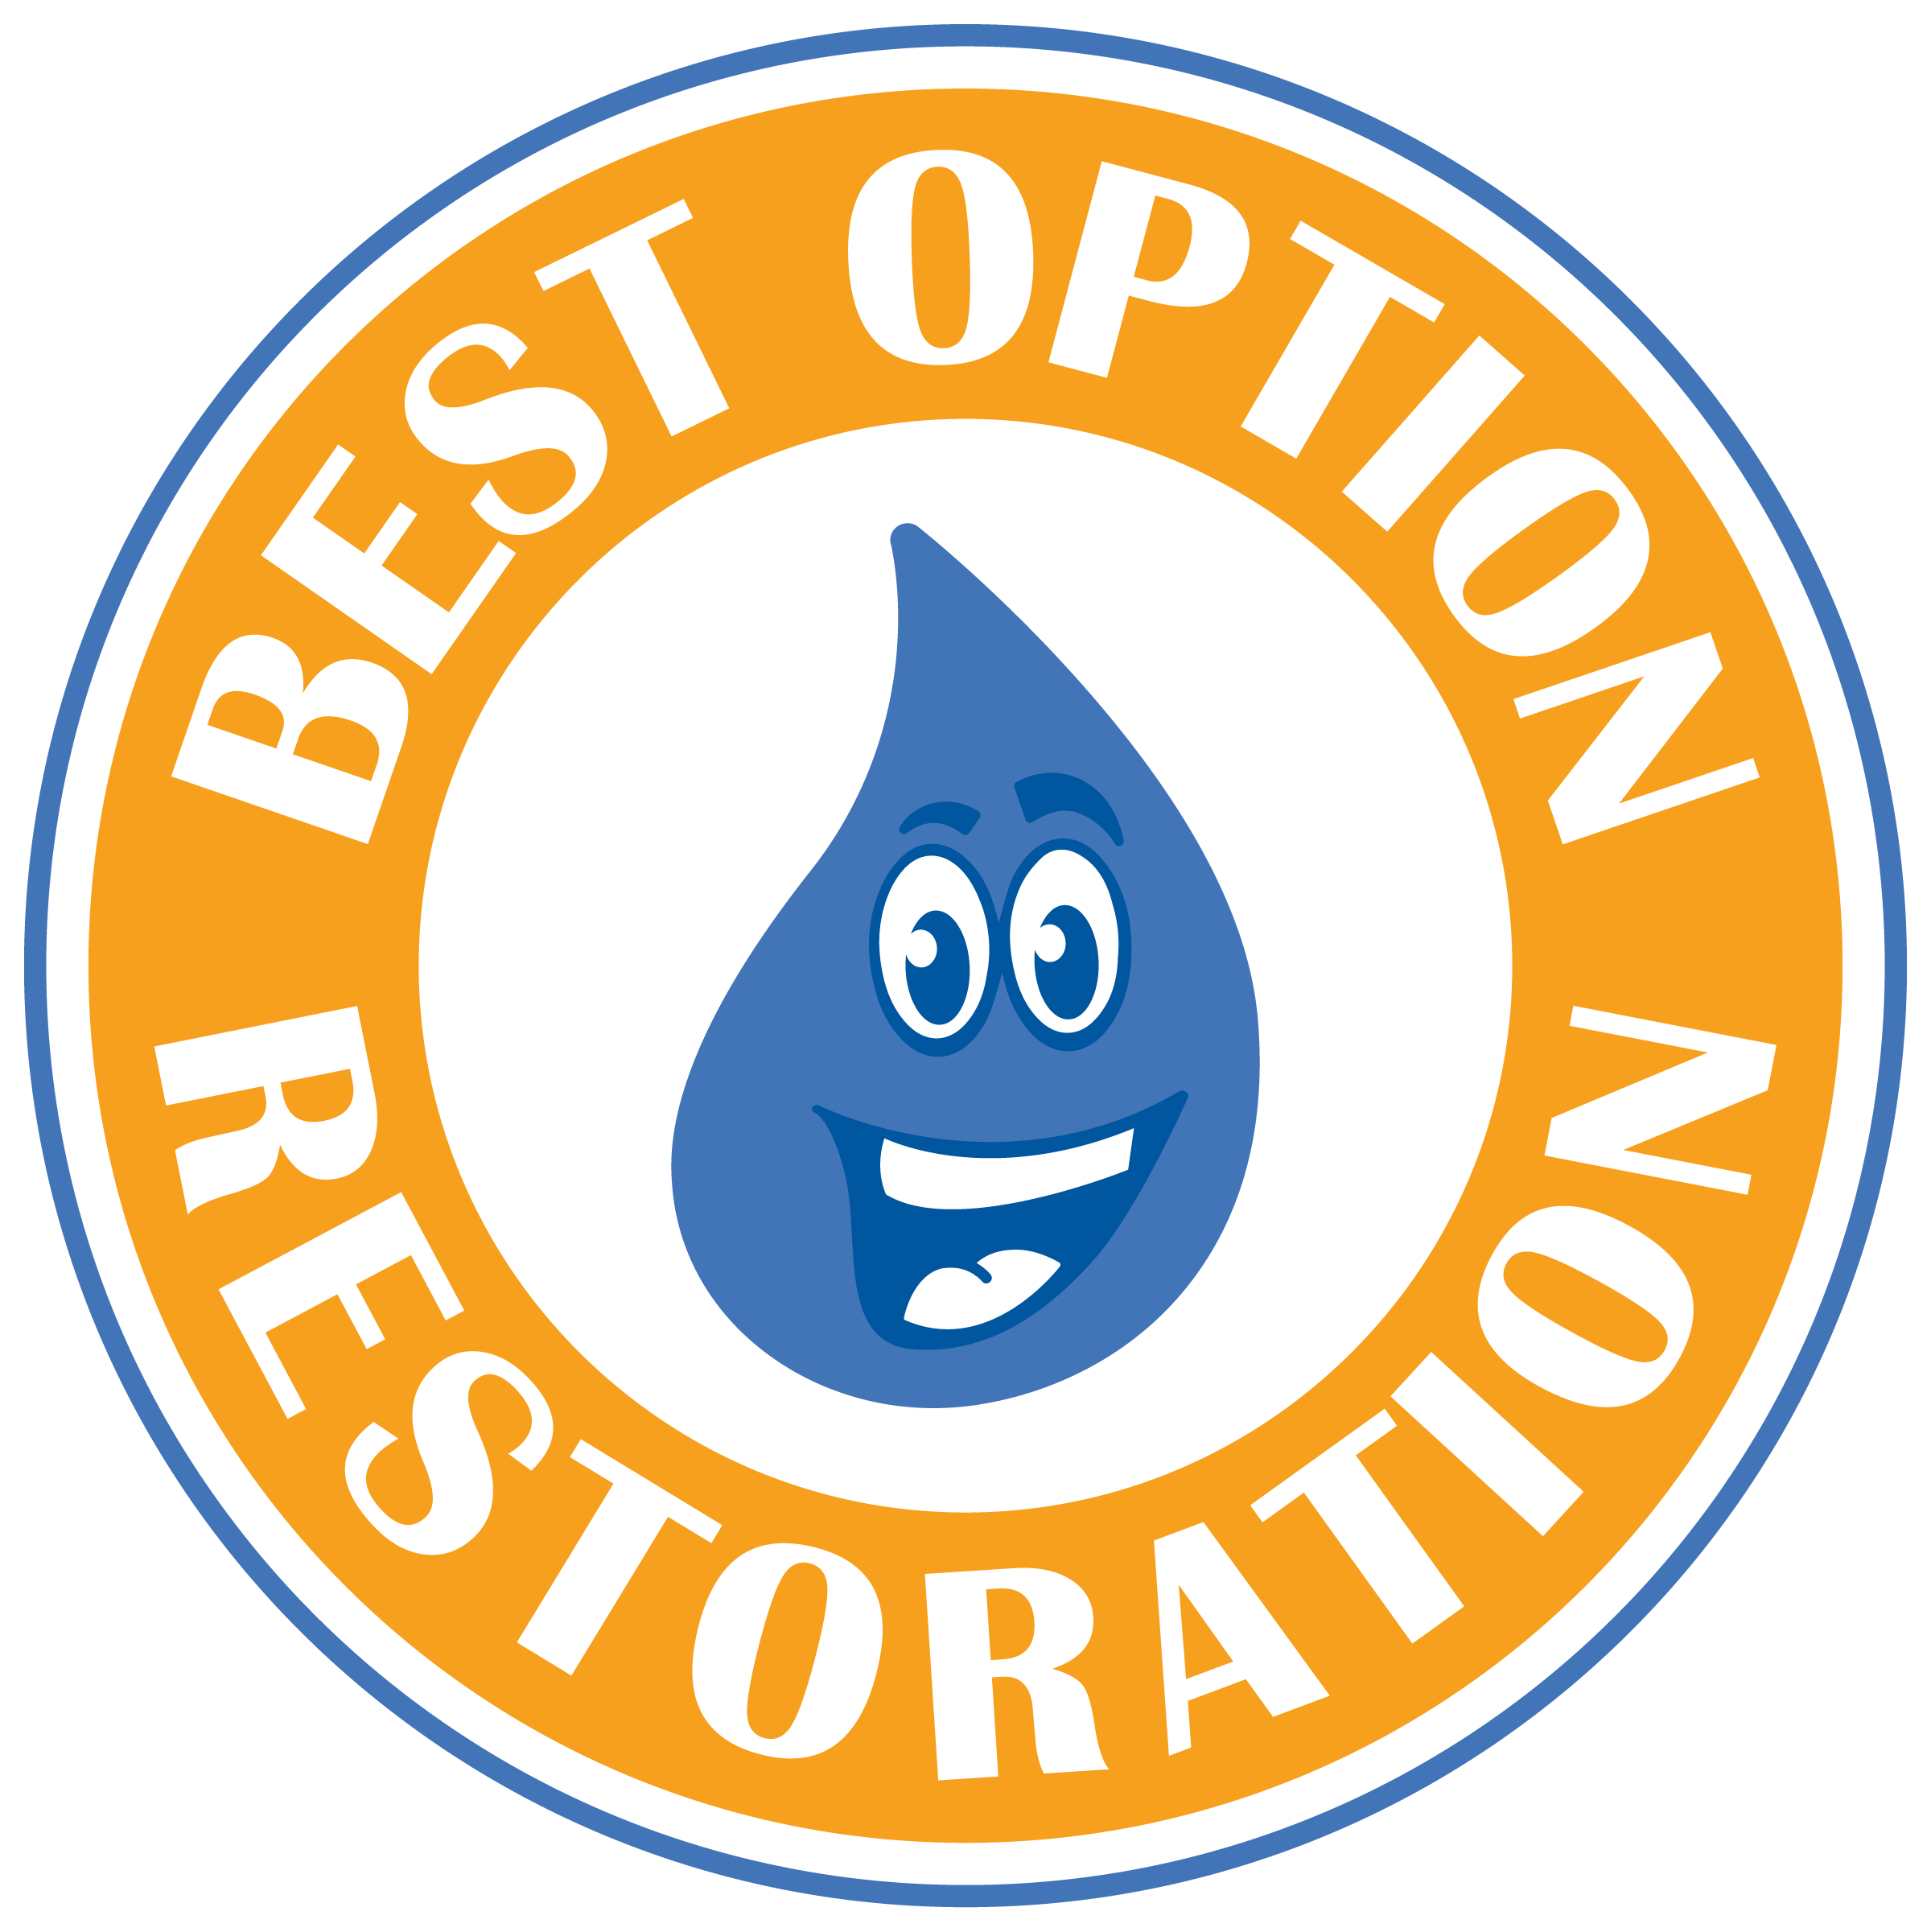 Who is the Best Restoration Franchise for new business owners?